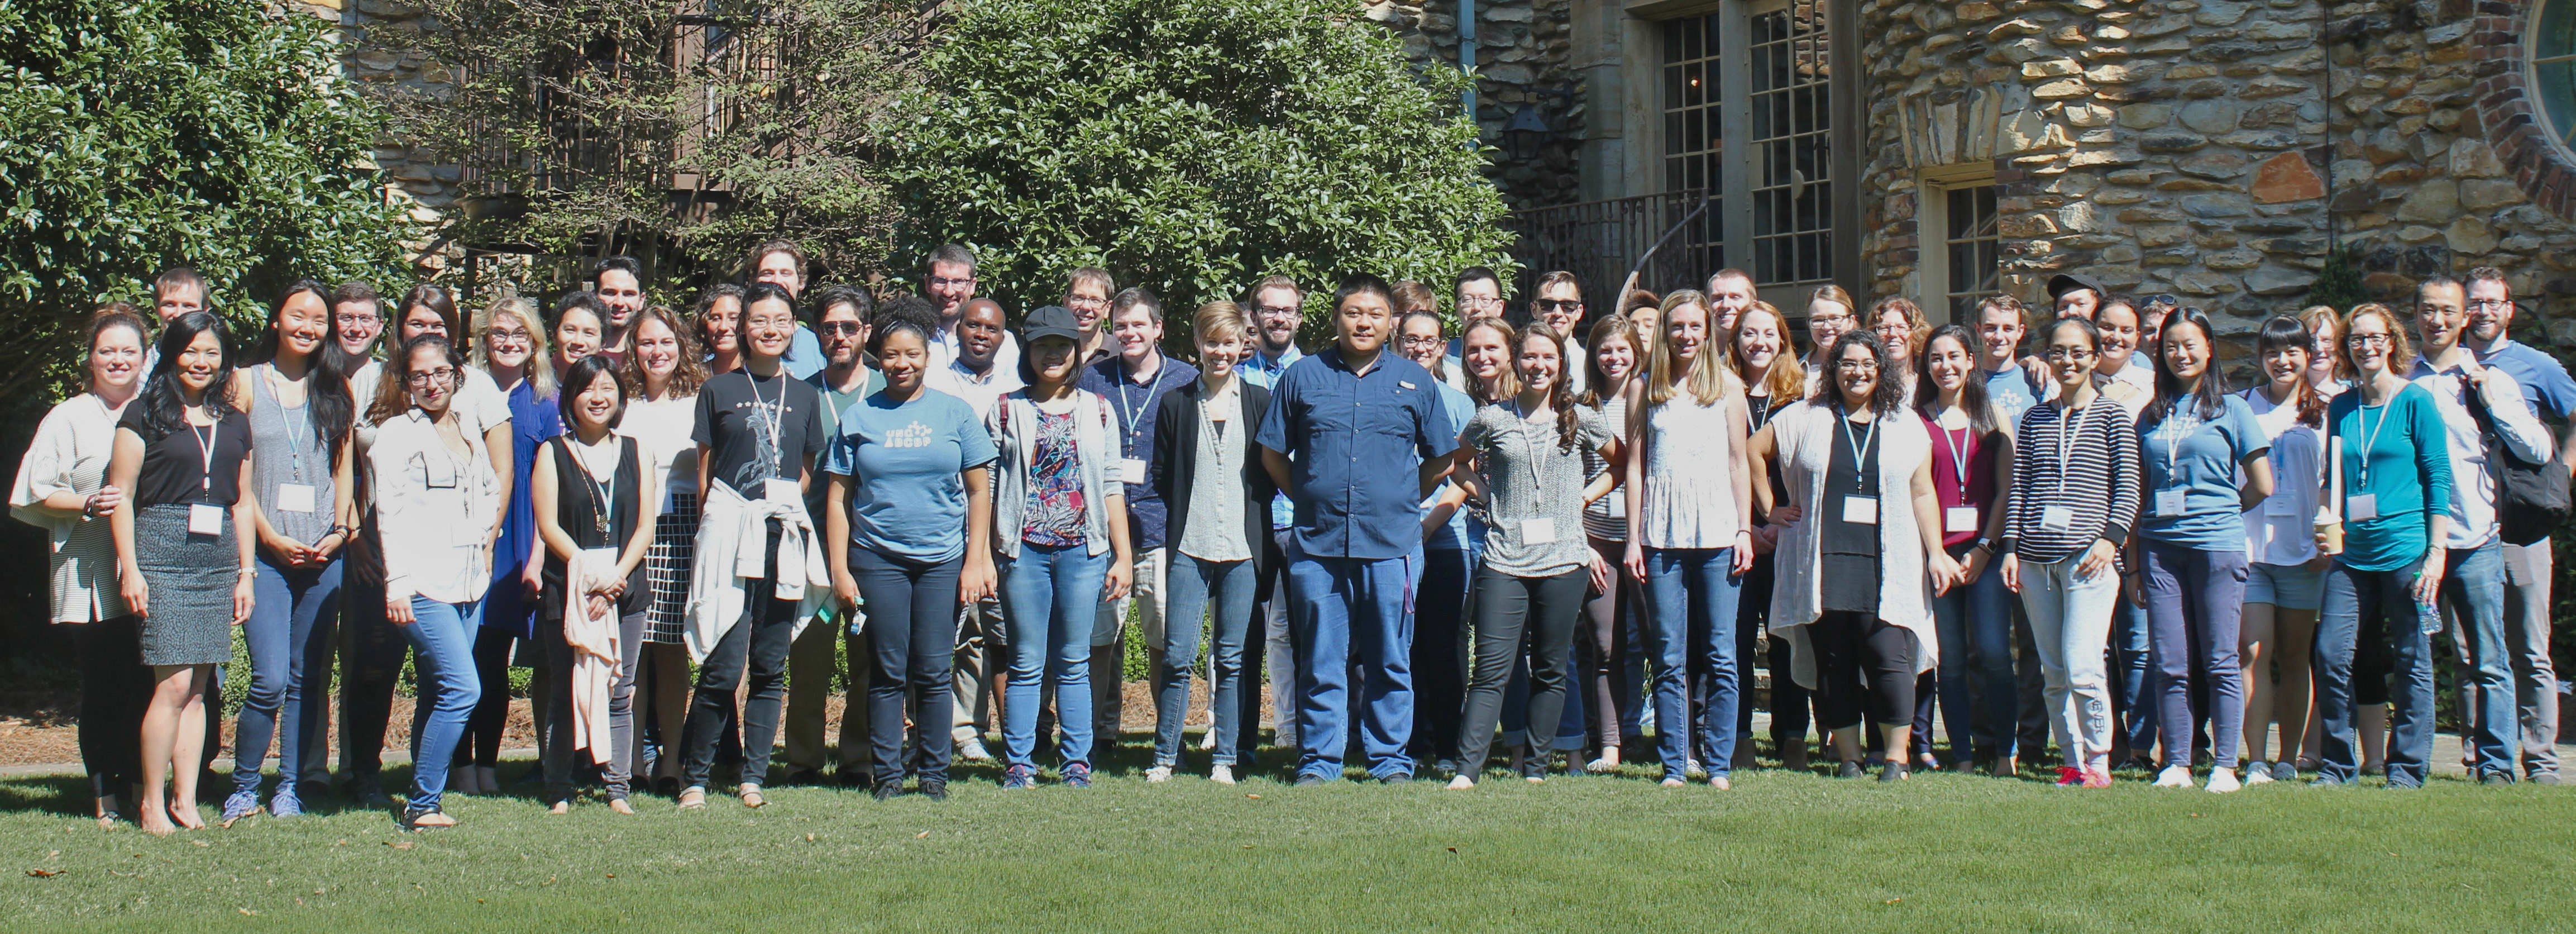 department photo of unc biochemistry and biophysics in 2018